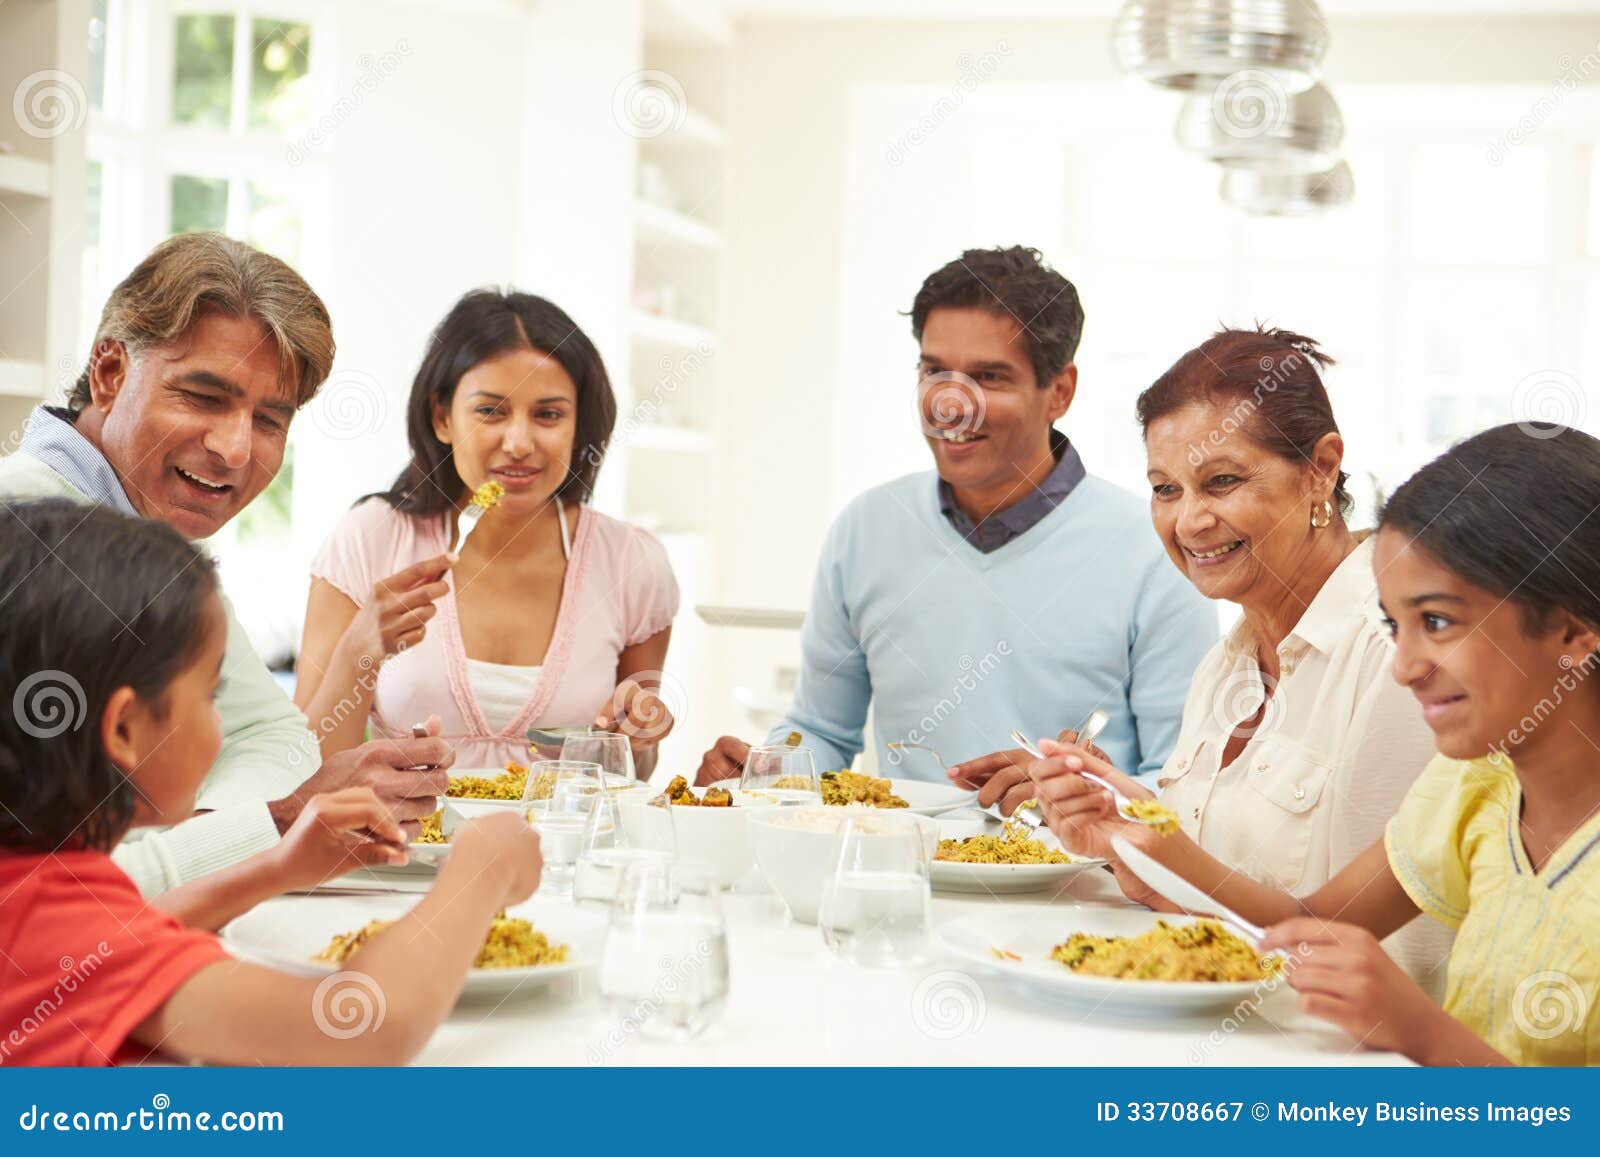 multi generation indian family eating meal at home